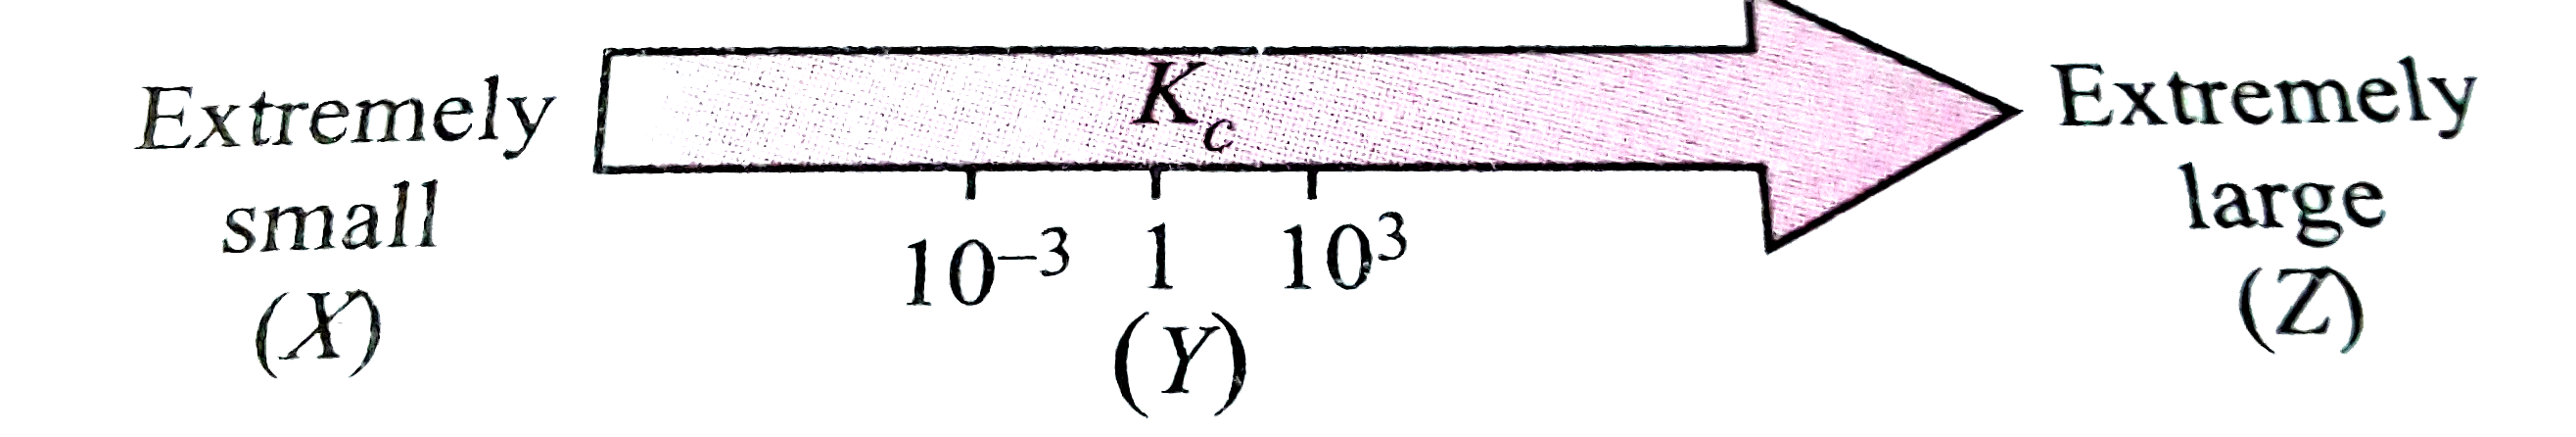 Study the figure below and mark the correct statement about K(c) and dependence of extent of reaction on it.